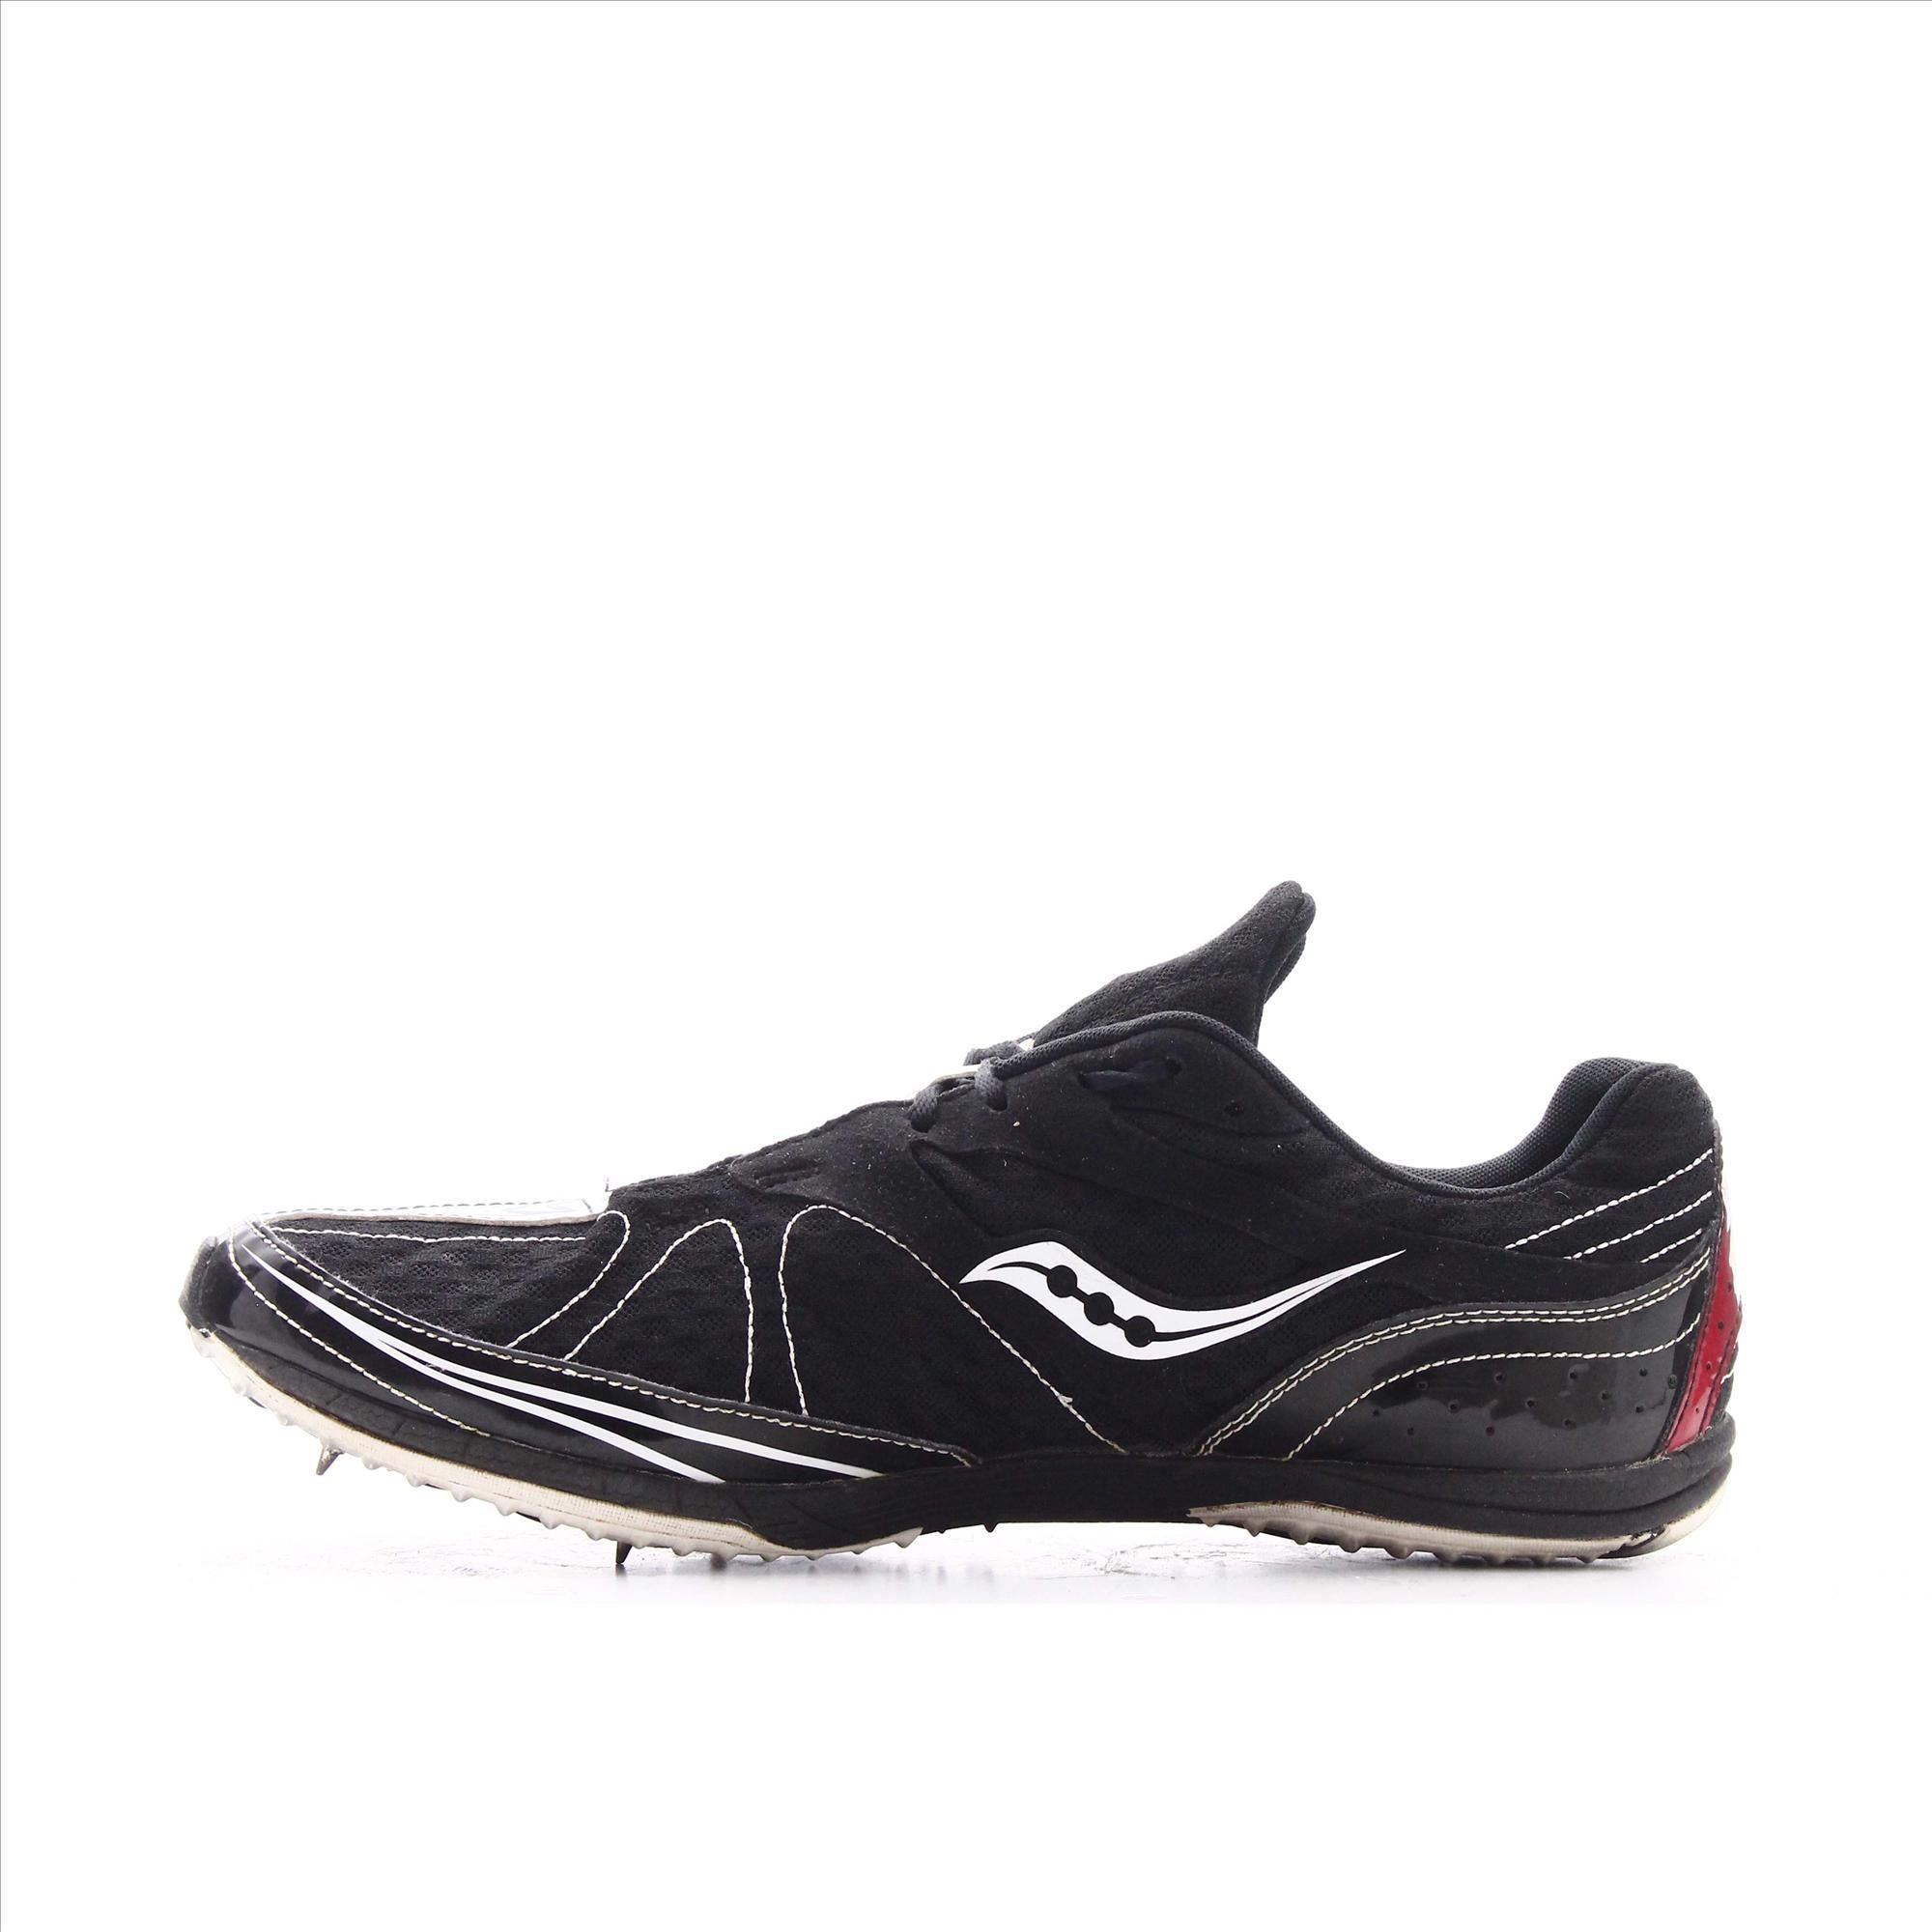 saucony shoes price in pakistan